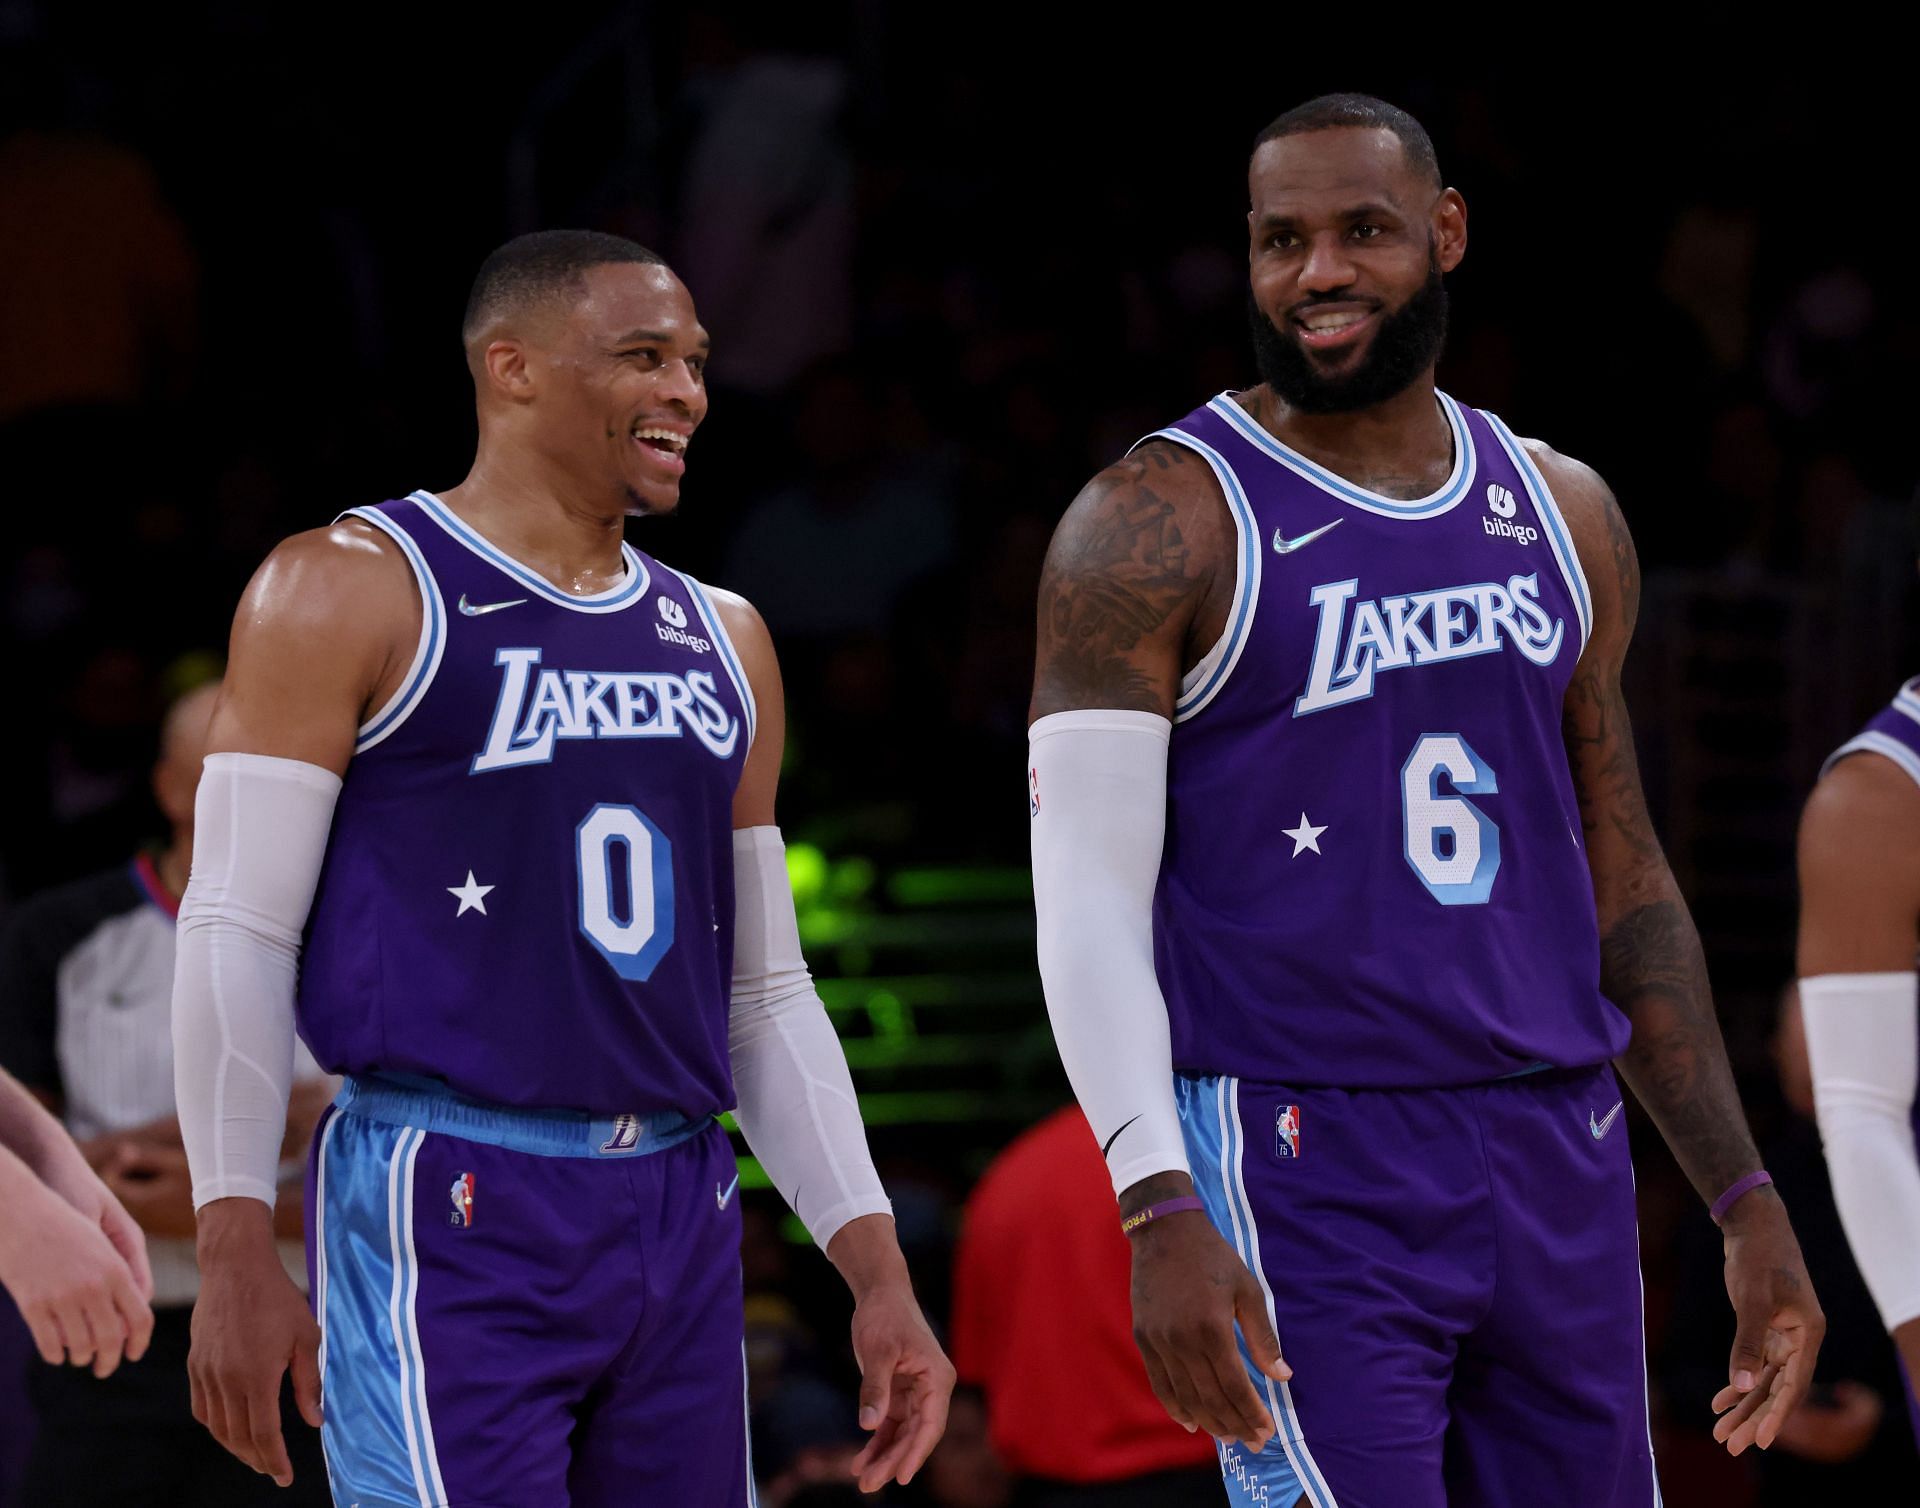 The LeBron James - Russell Westbrook duo is coming to life